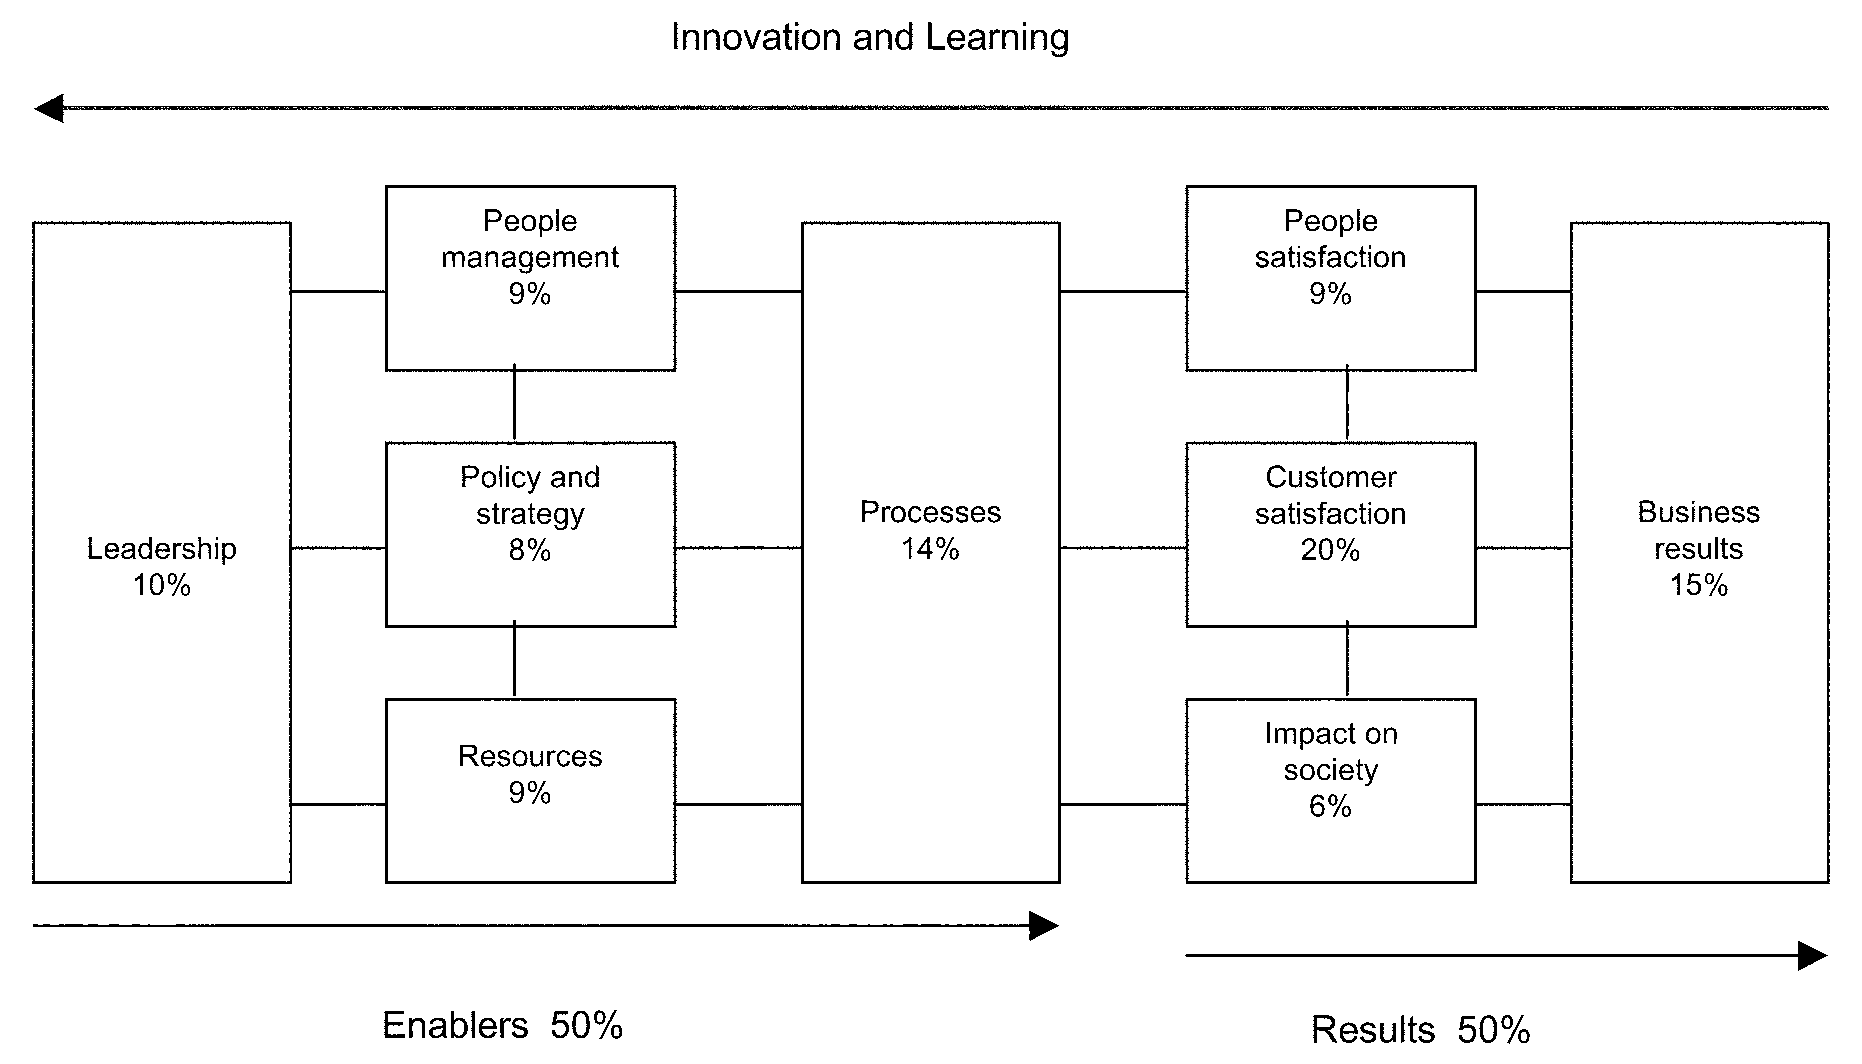 Innovation and Learning